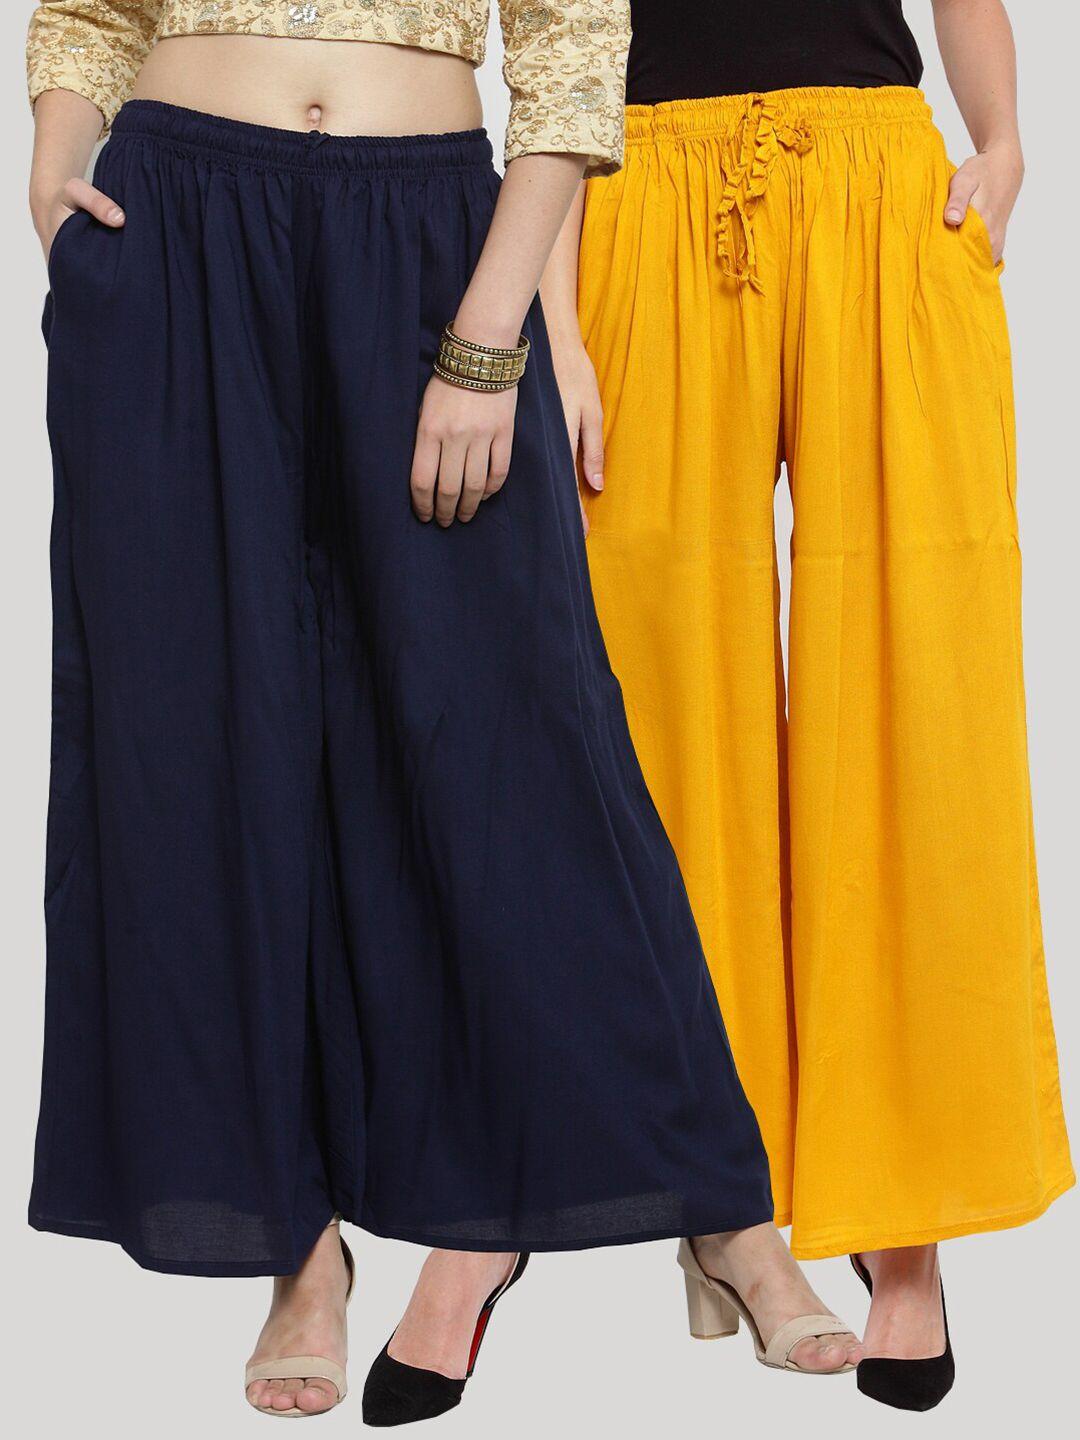 clora creation women pack of 2 yellow & navy blue knitted ethnic palazzos